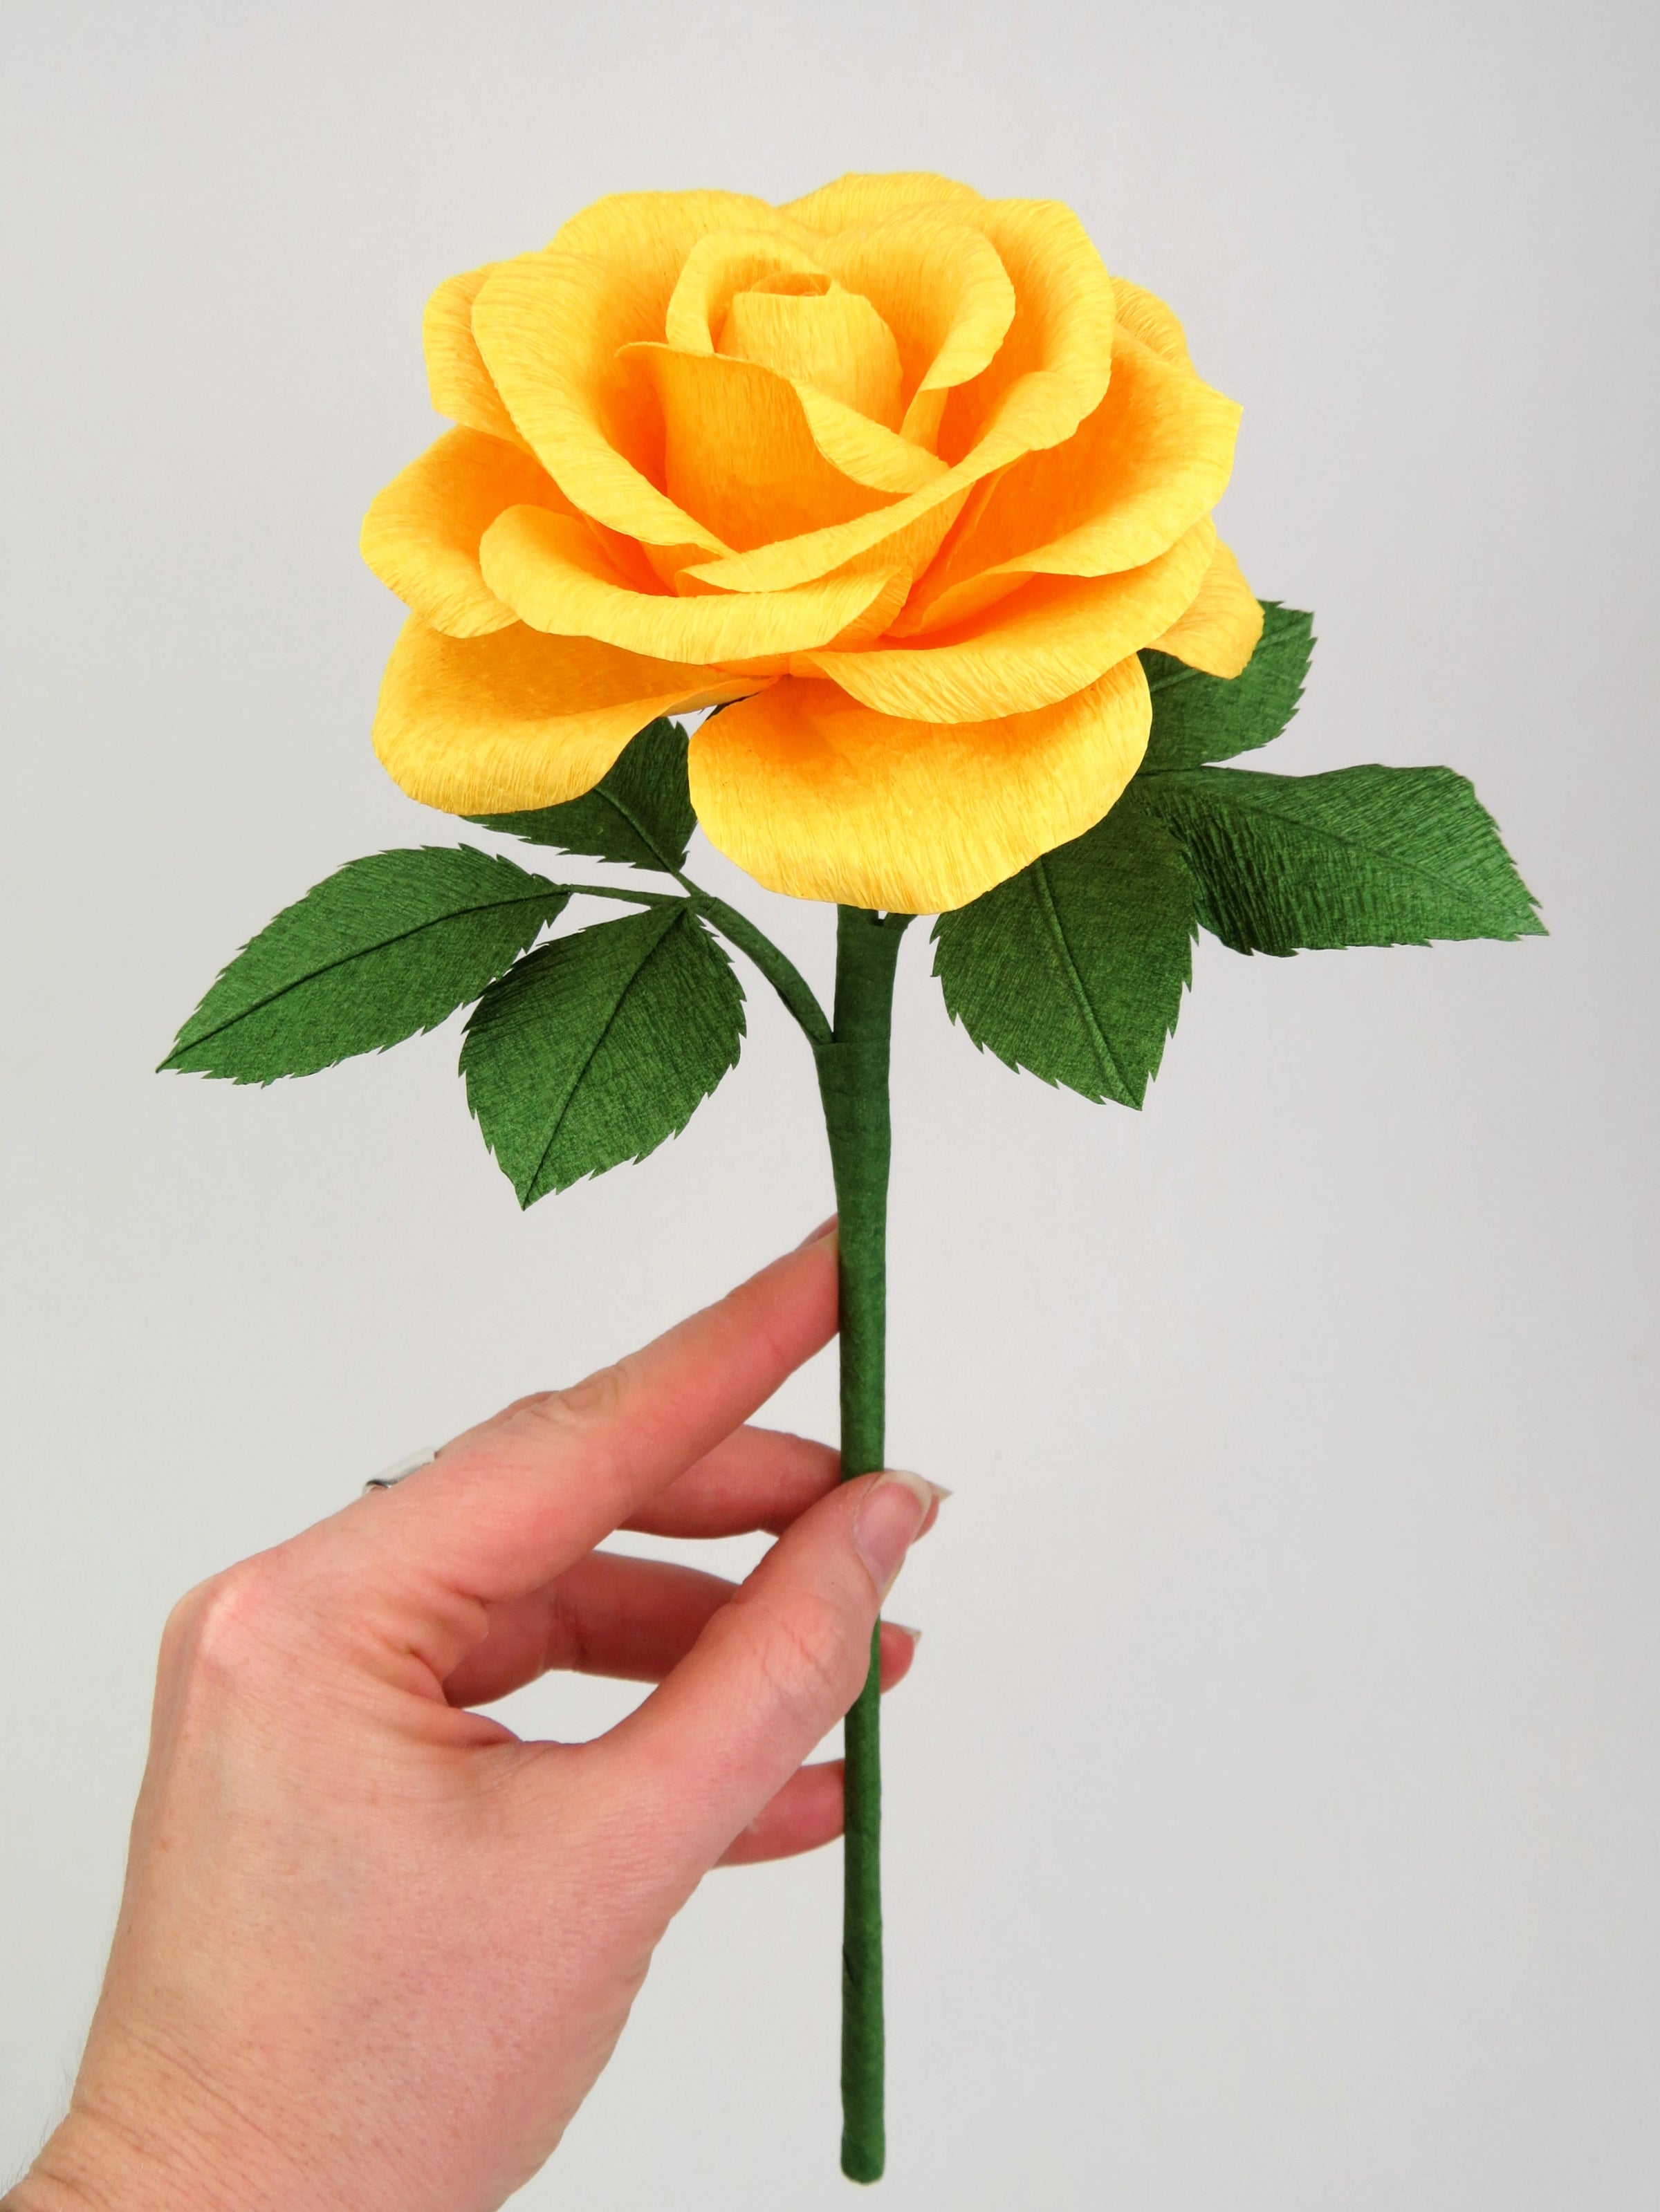 Pale white hand delicately holding the stem of a yellow paper rose with six leaves